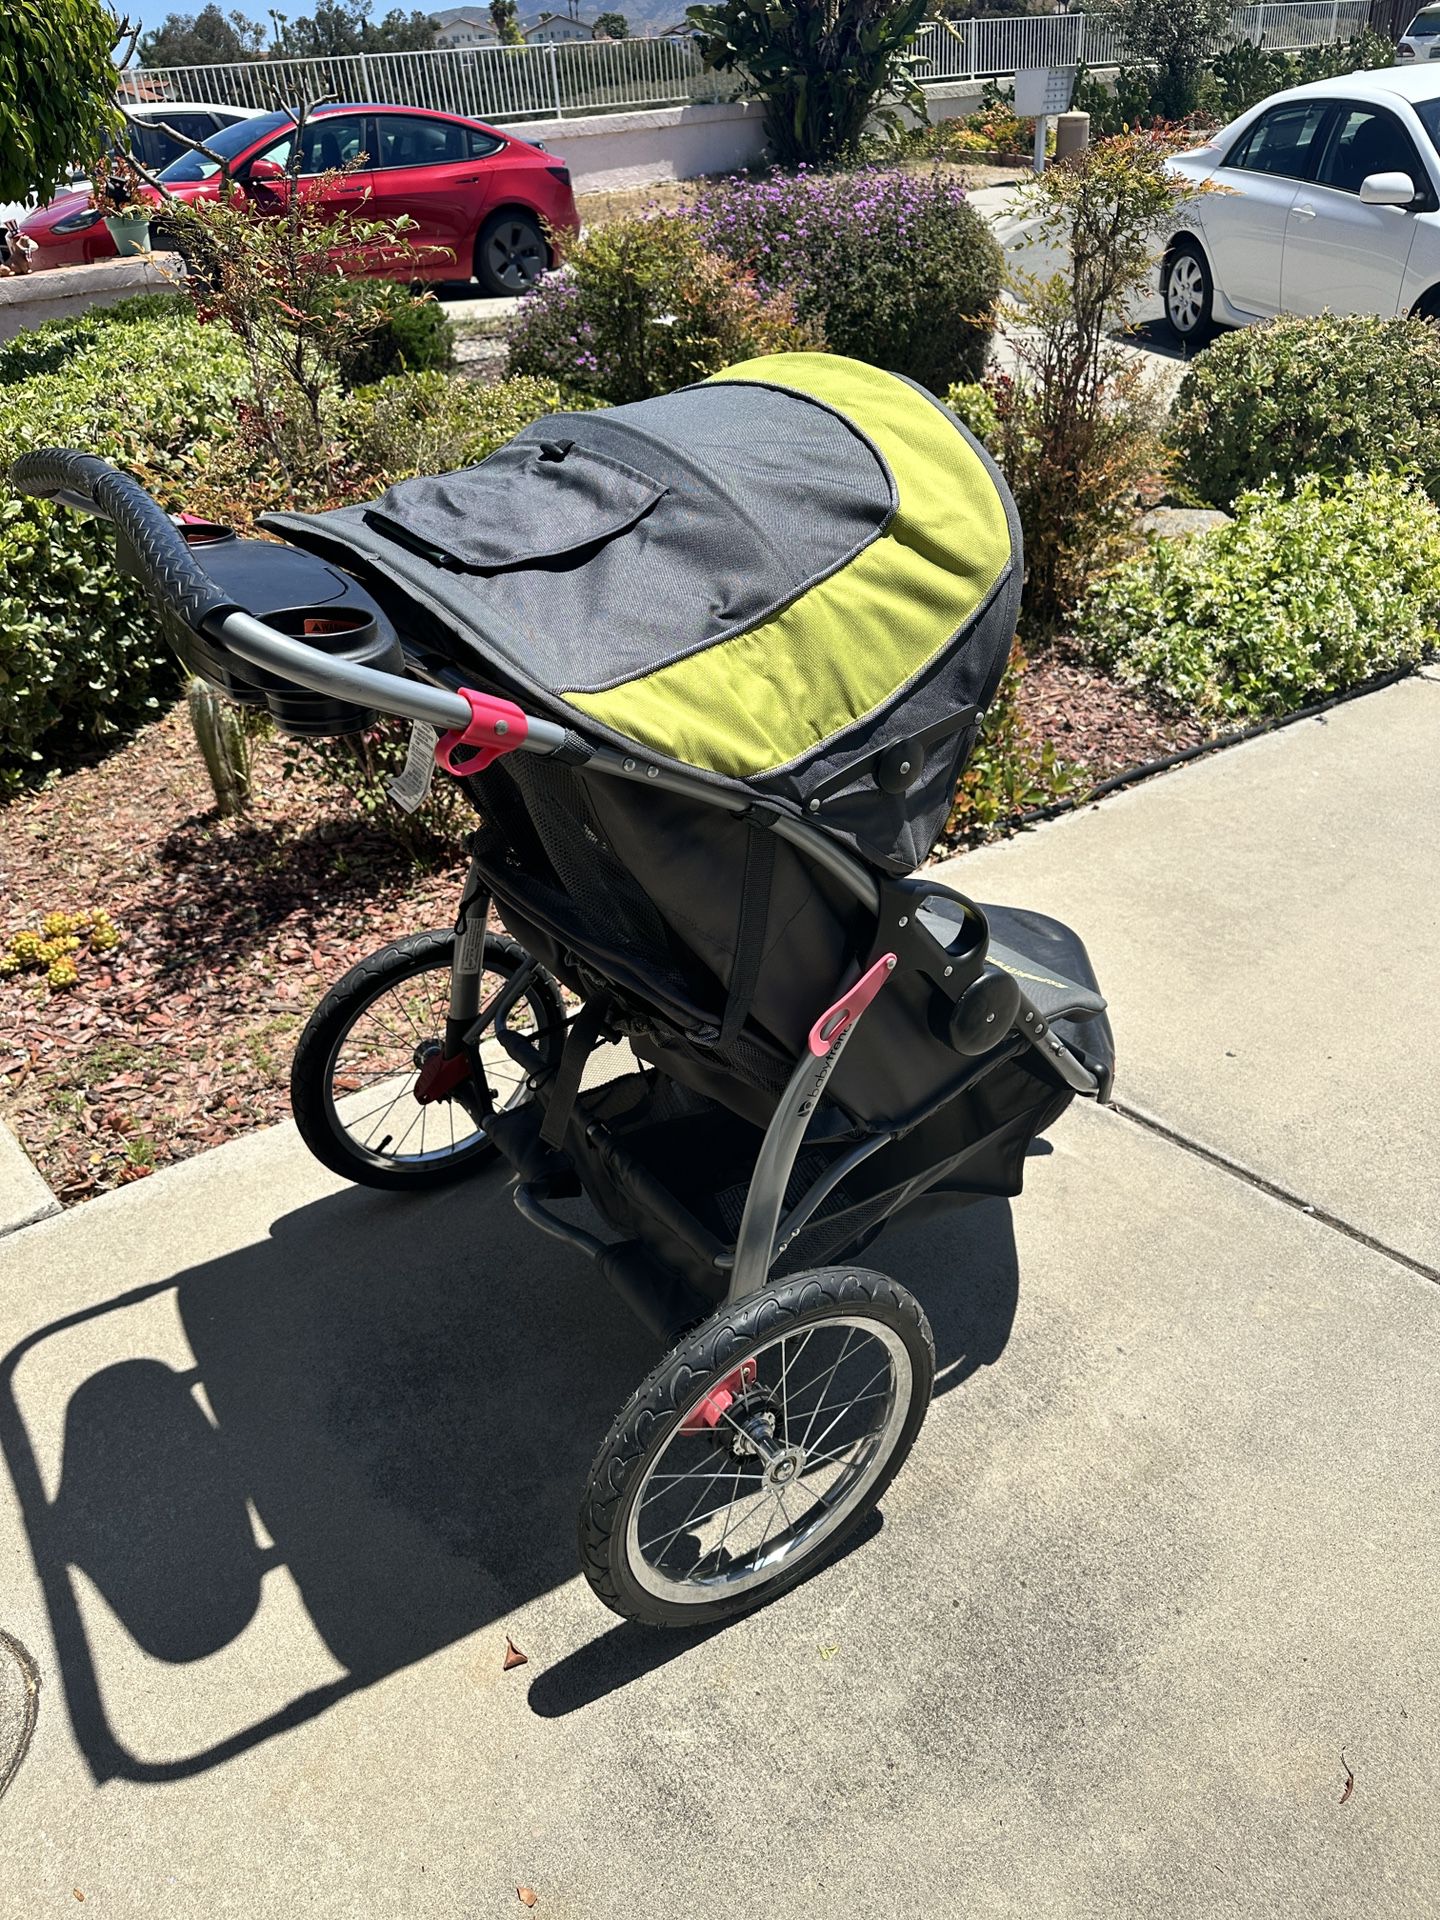 Baby Trend Expedition Twin Jogging Stroller 